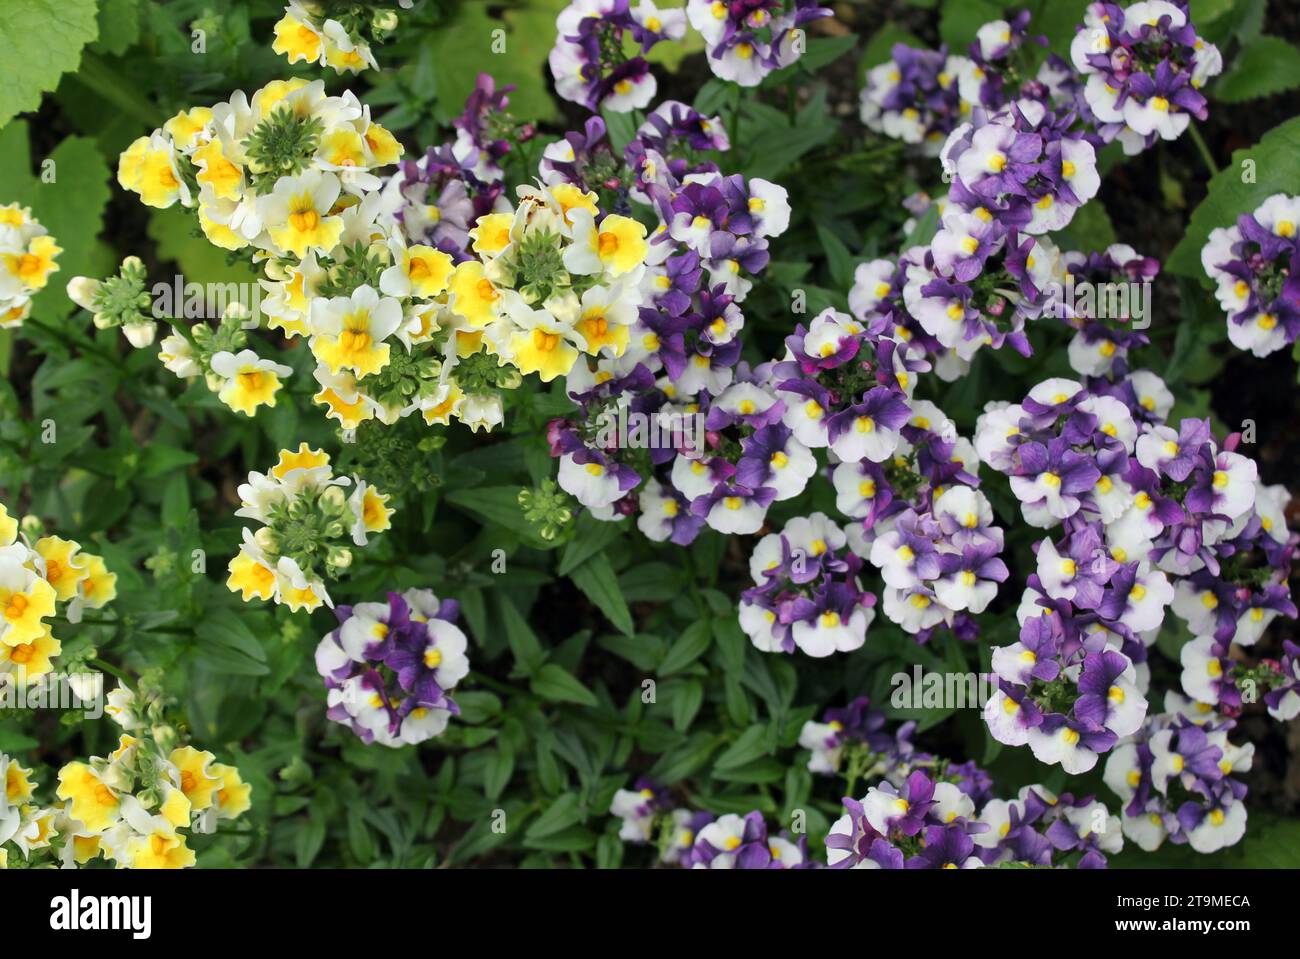 Hybrid Nemesia plants Sunpeddle yellow white and Sunpeddle painted plum together in garden border Stock Photo